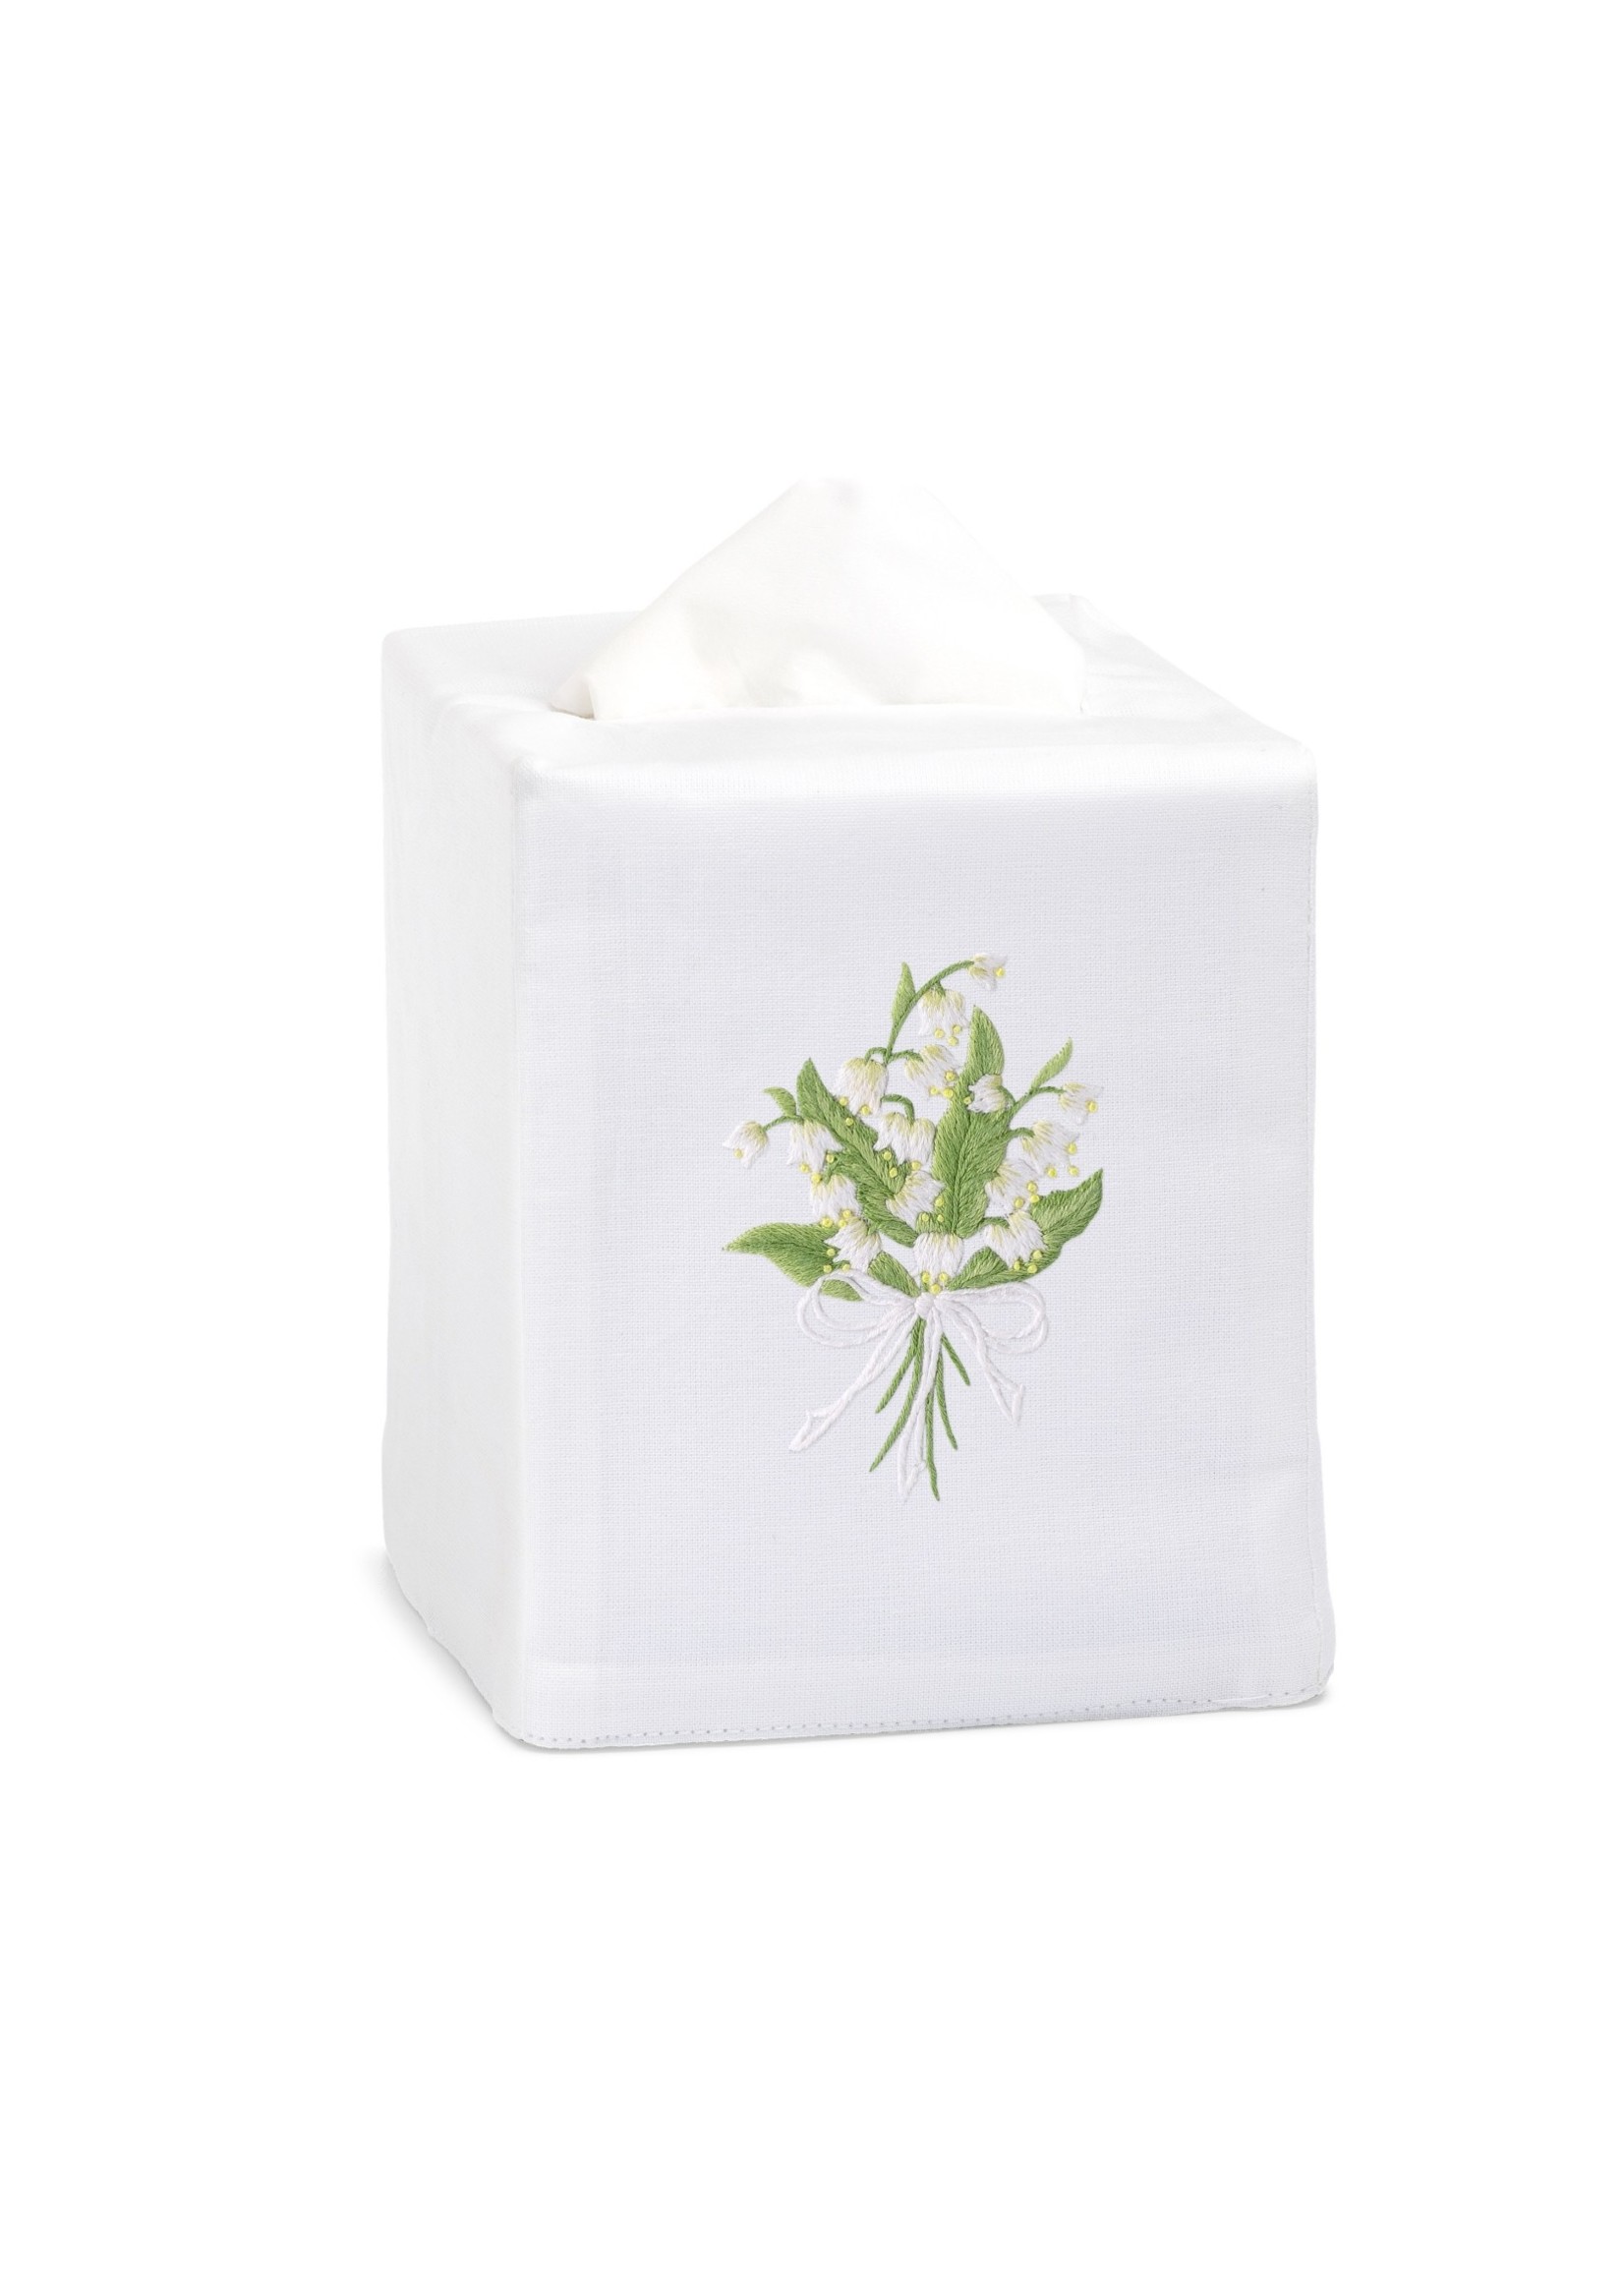 Henry Handwork Tissue Box Cover - Lily of the Valley